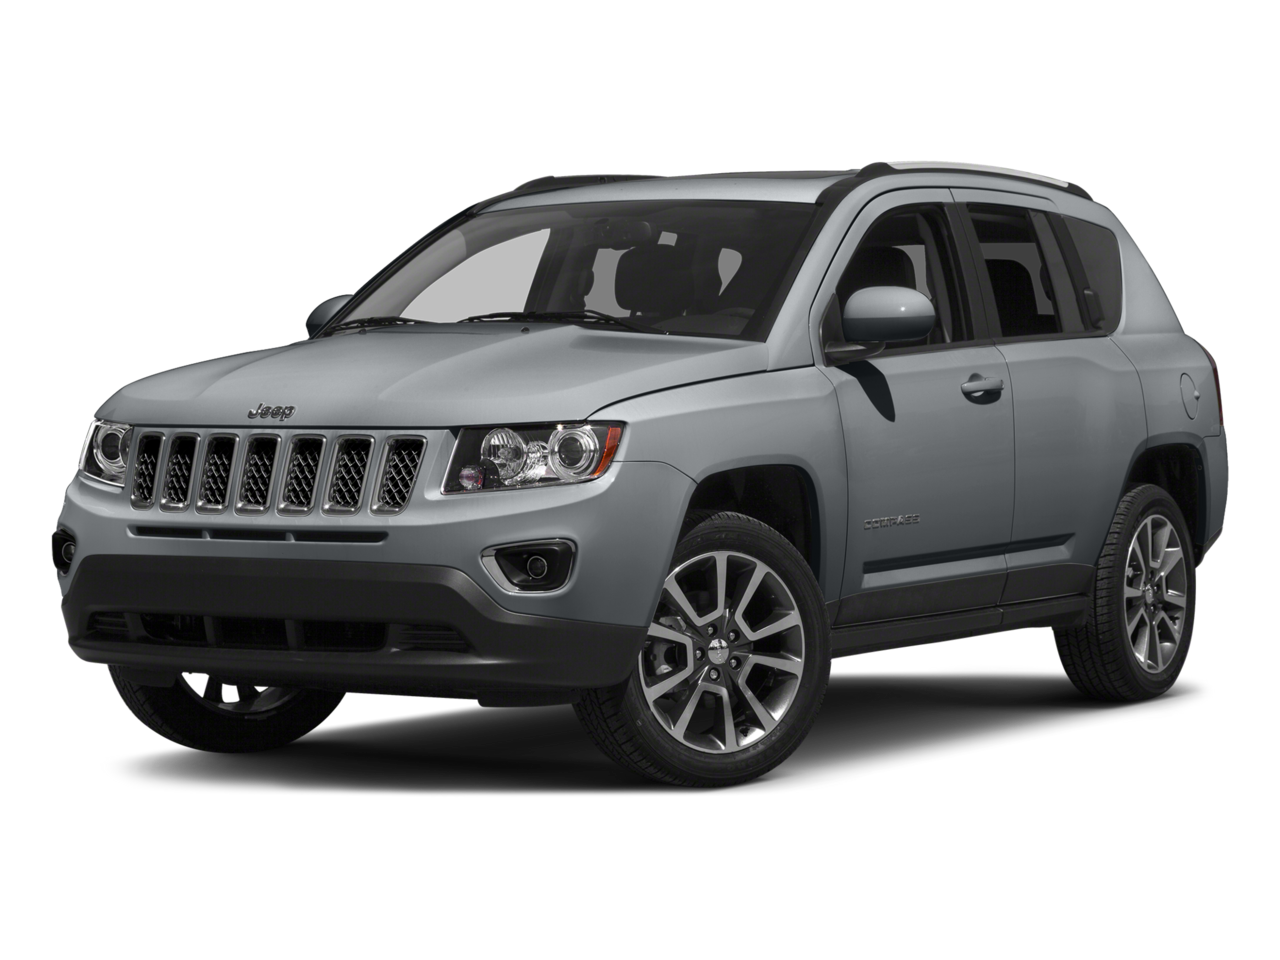 2015 Jeep Compass Repair: Service and Maintenance Cost